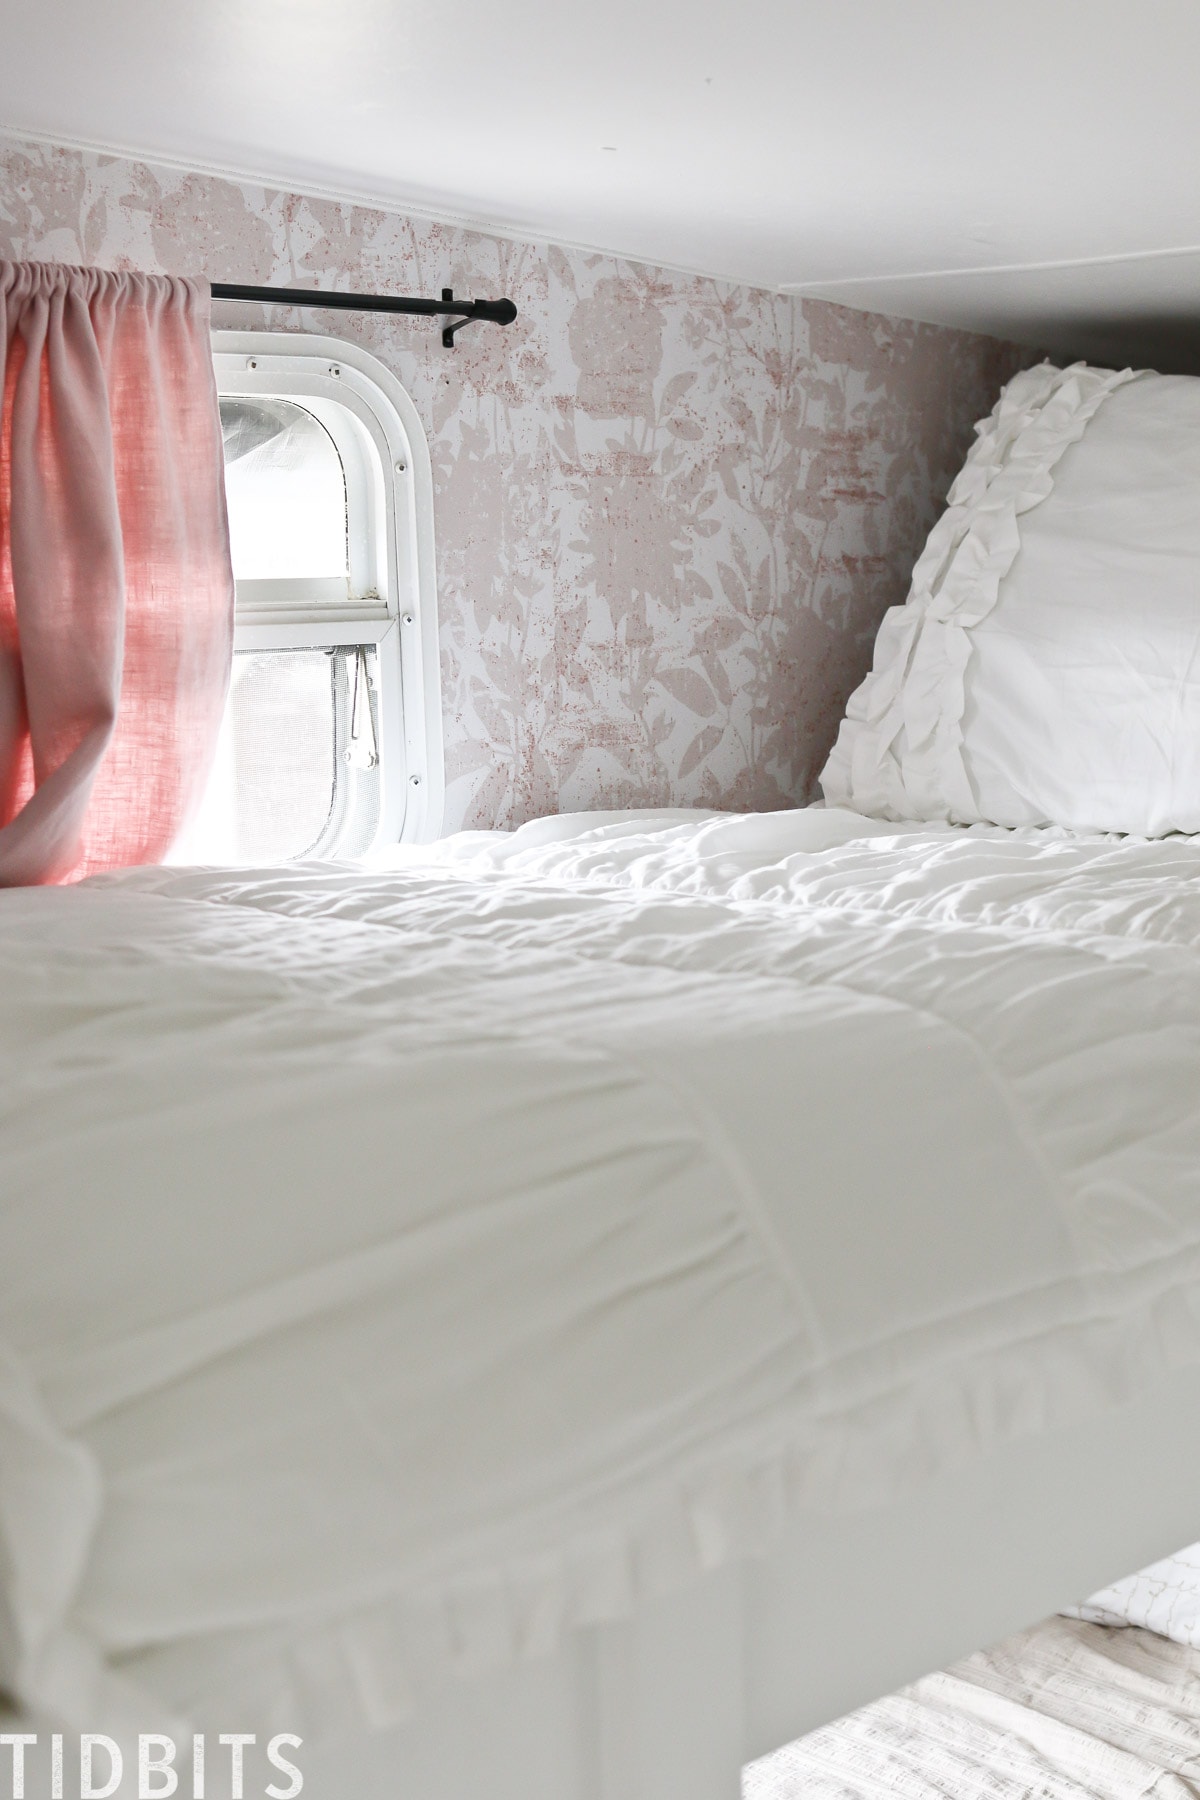 RV Bedding and Bunk bedding - Beddy's Beds